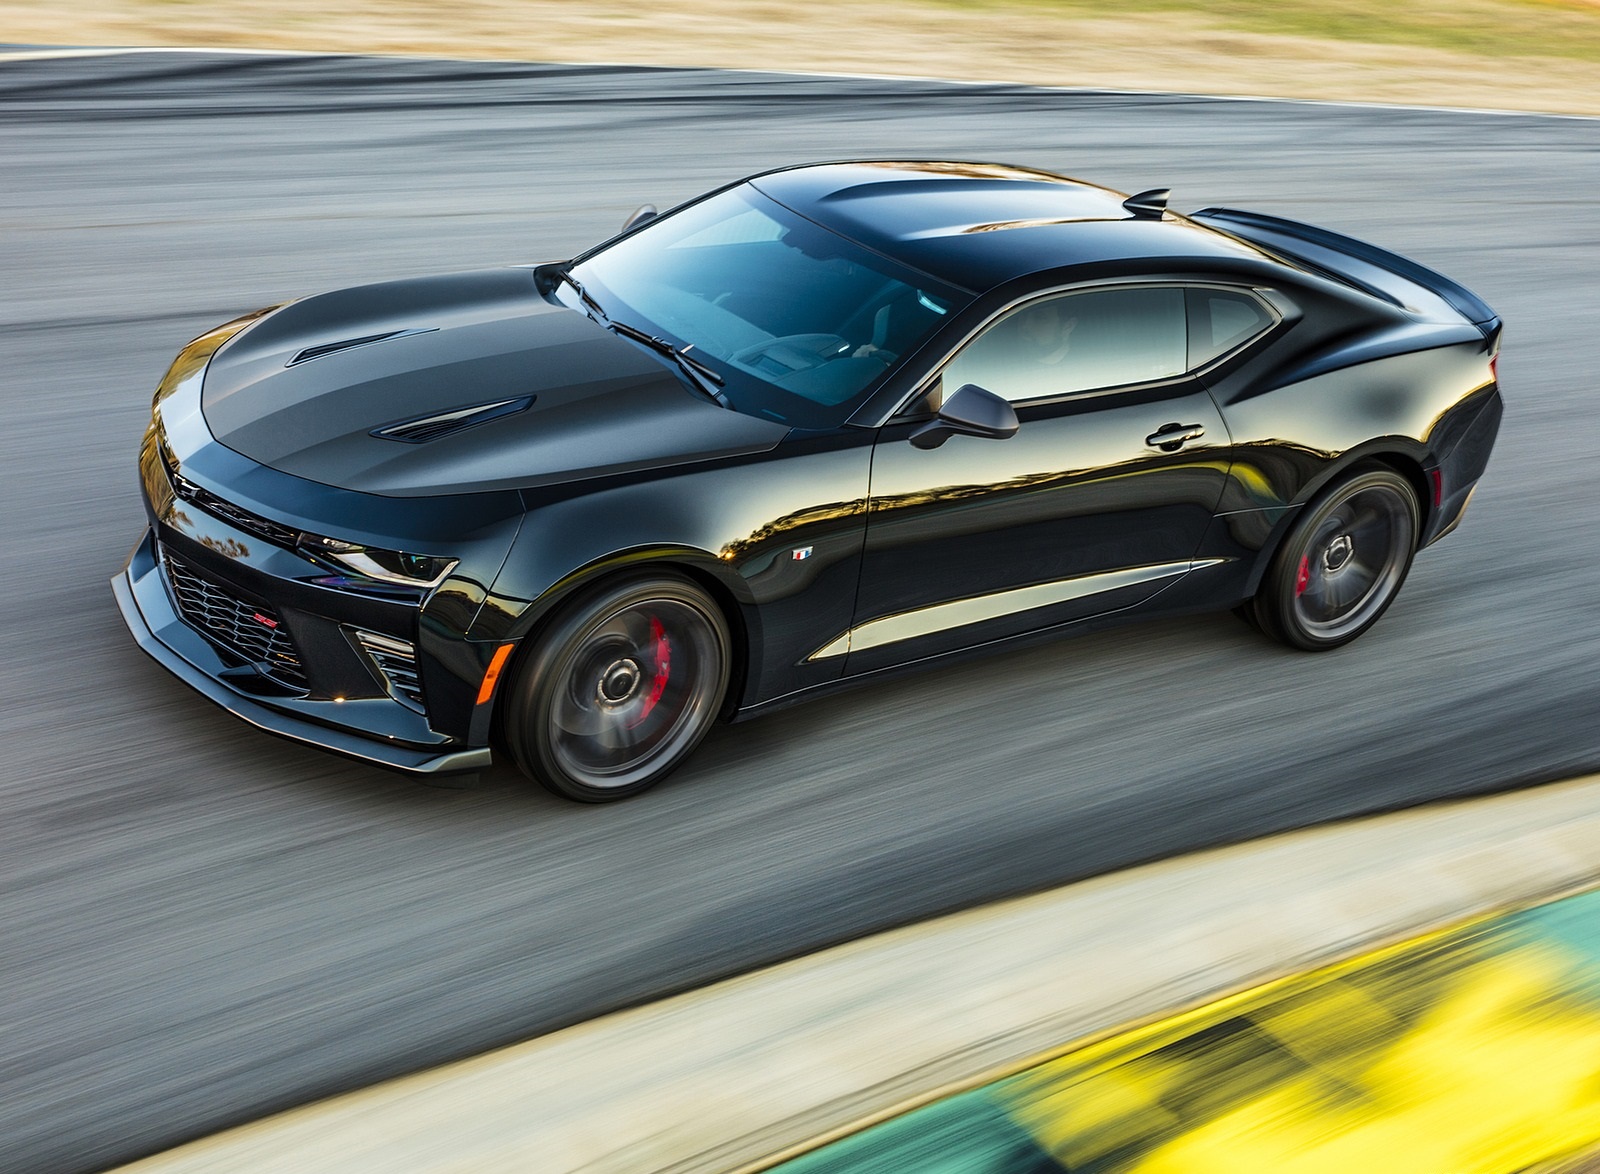 2017 Chevrolet Camaro SS 1LE Performance Package Black Top Wallpapers (4)